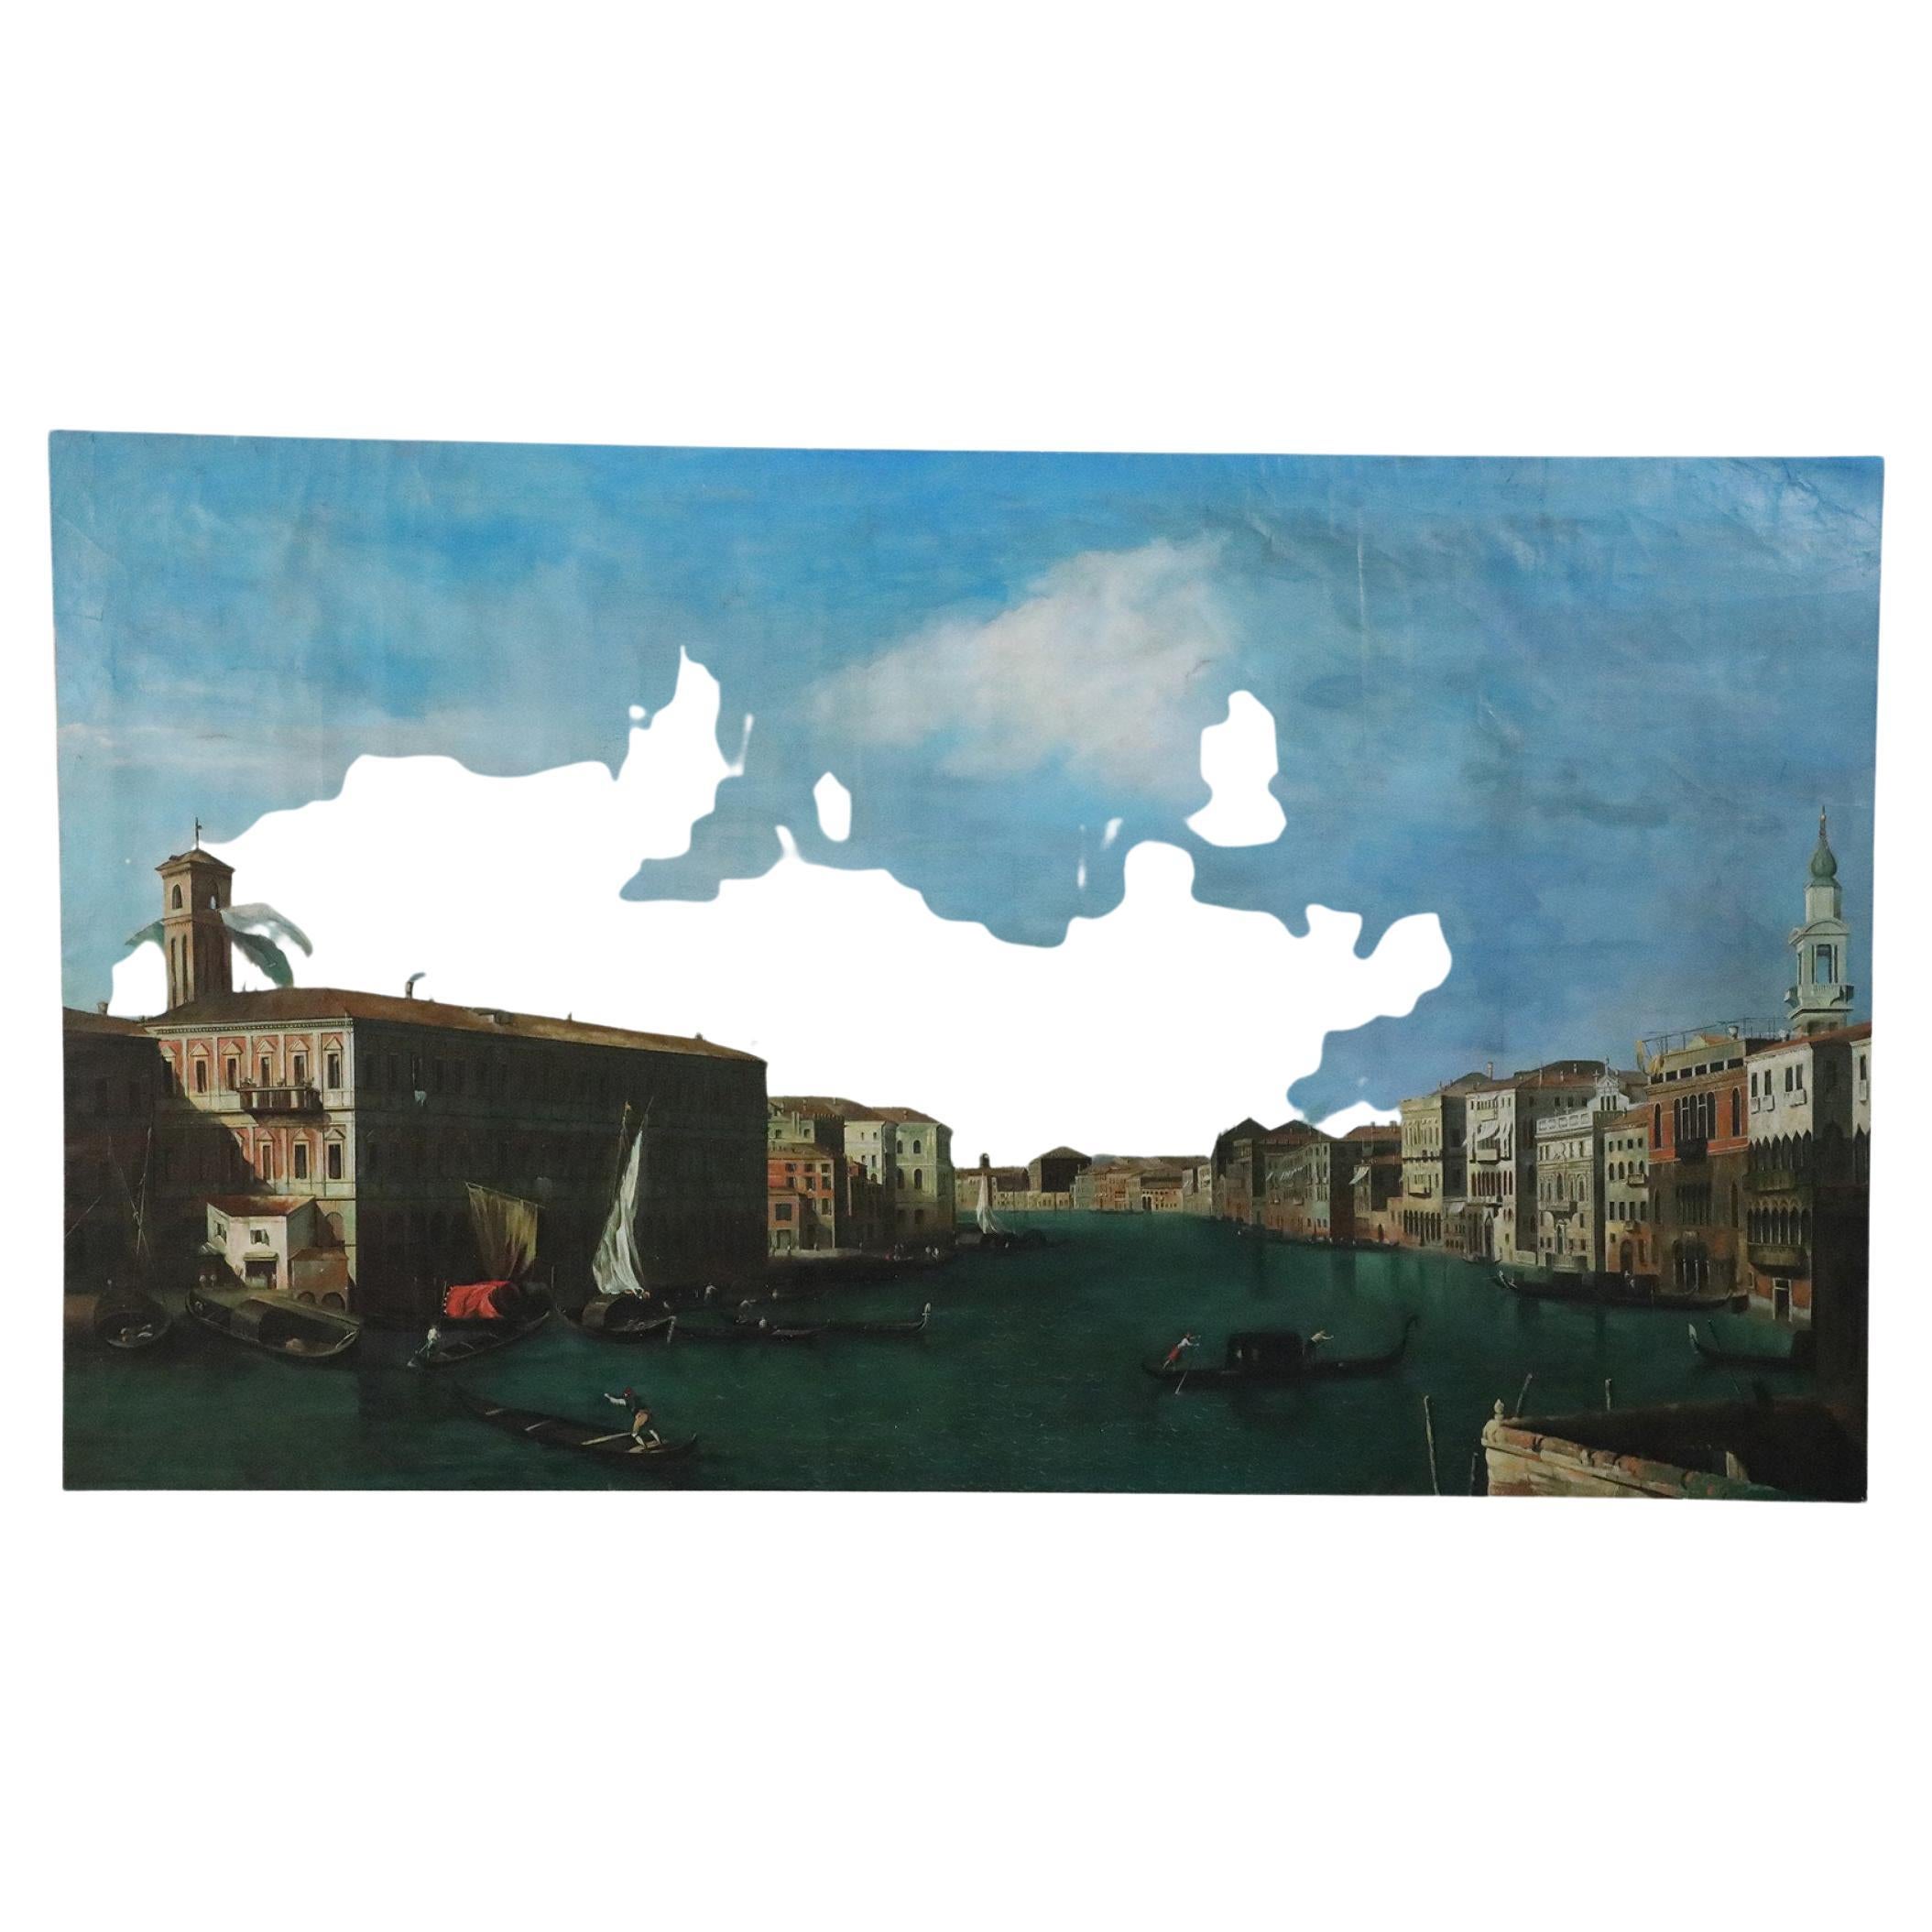 Vintage Venetian-style (20th Century) painting of a canal busy with gondolas winding through a town of classical architecture cast partly in shadow, under a blue sky. Painted on rectangular, unframed canvas.
 